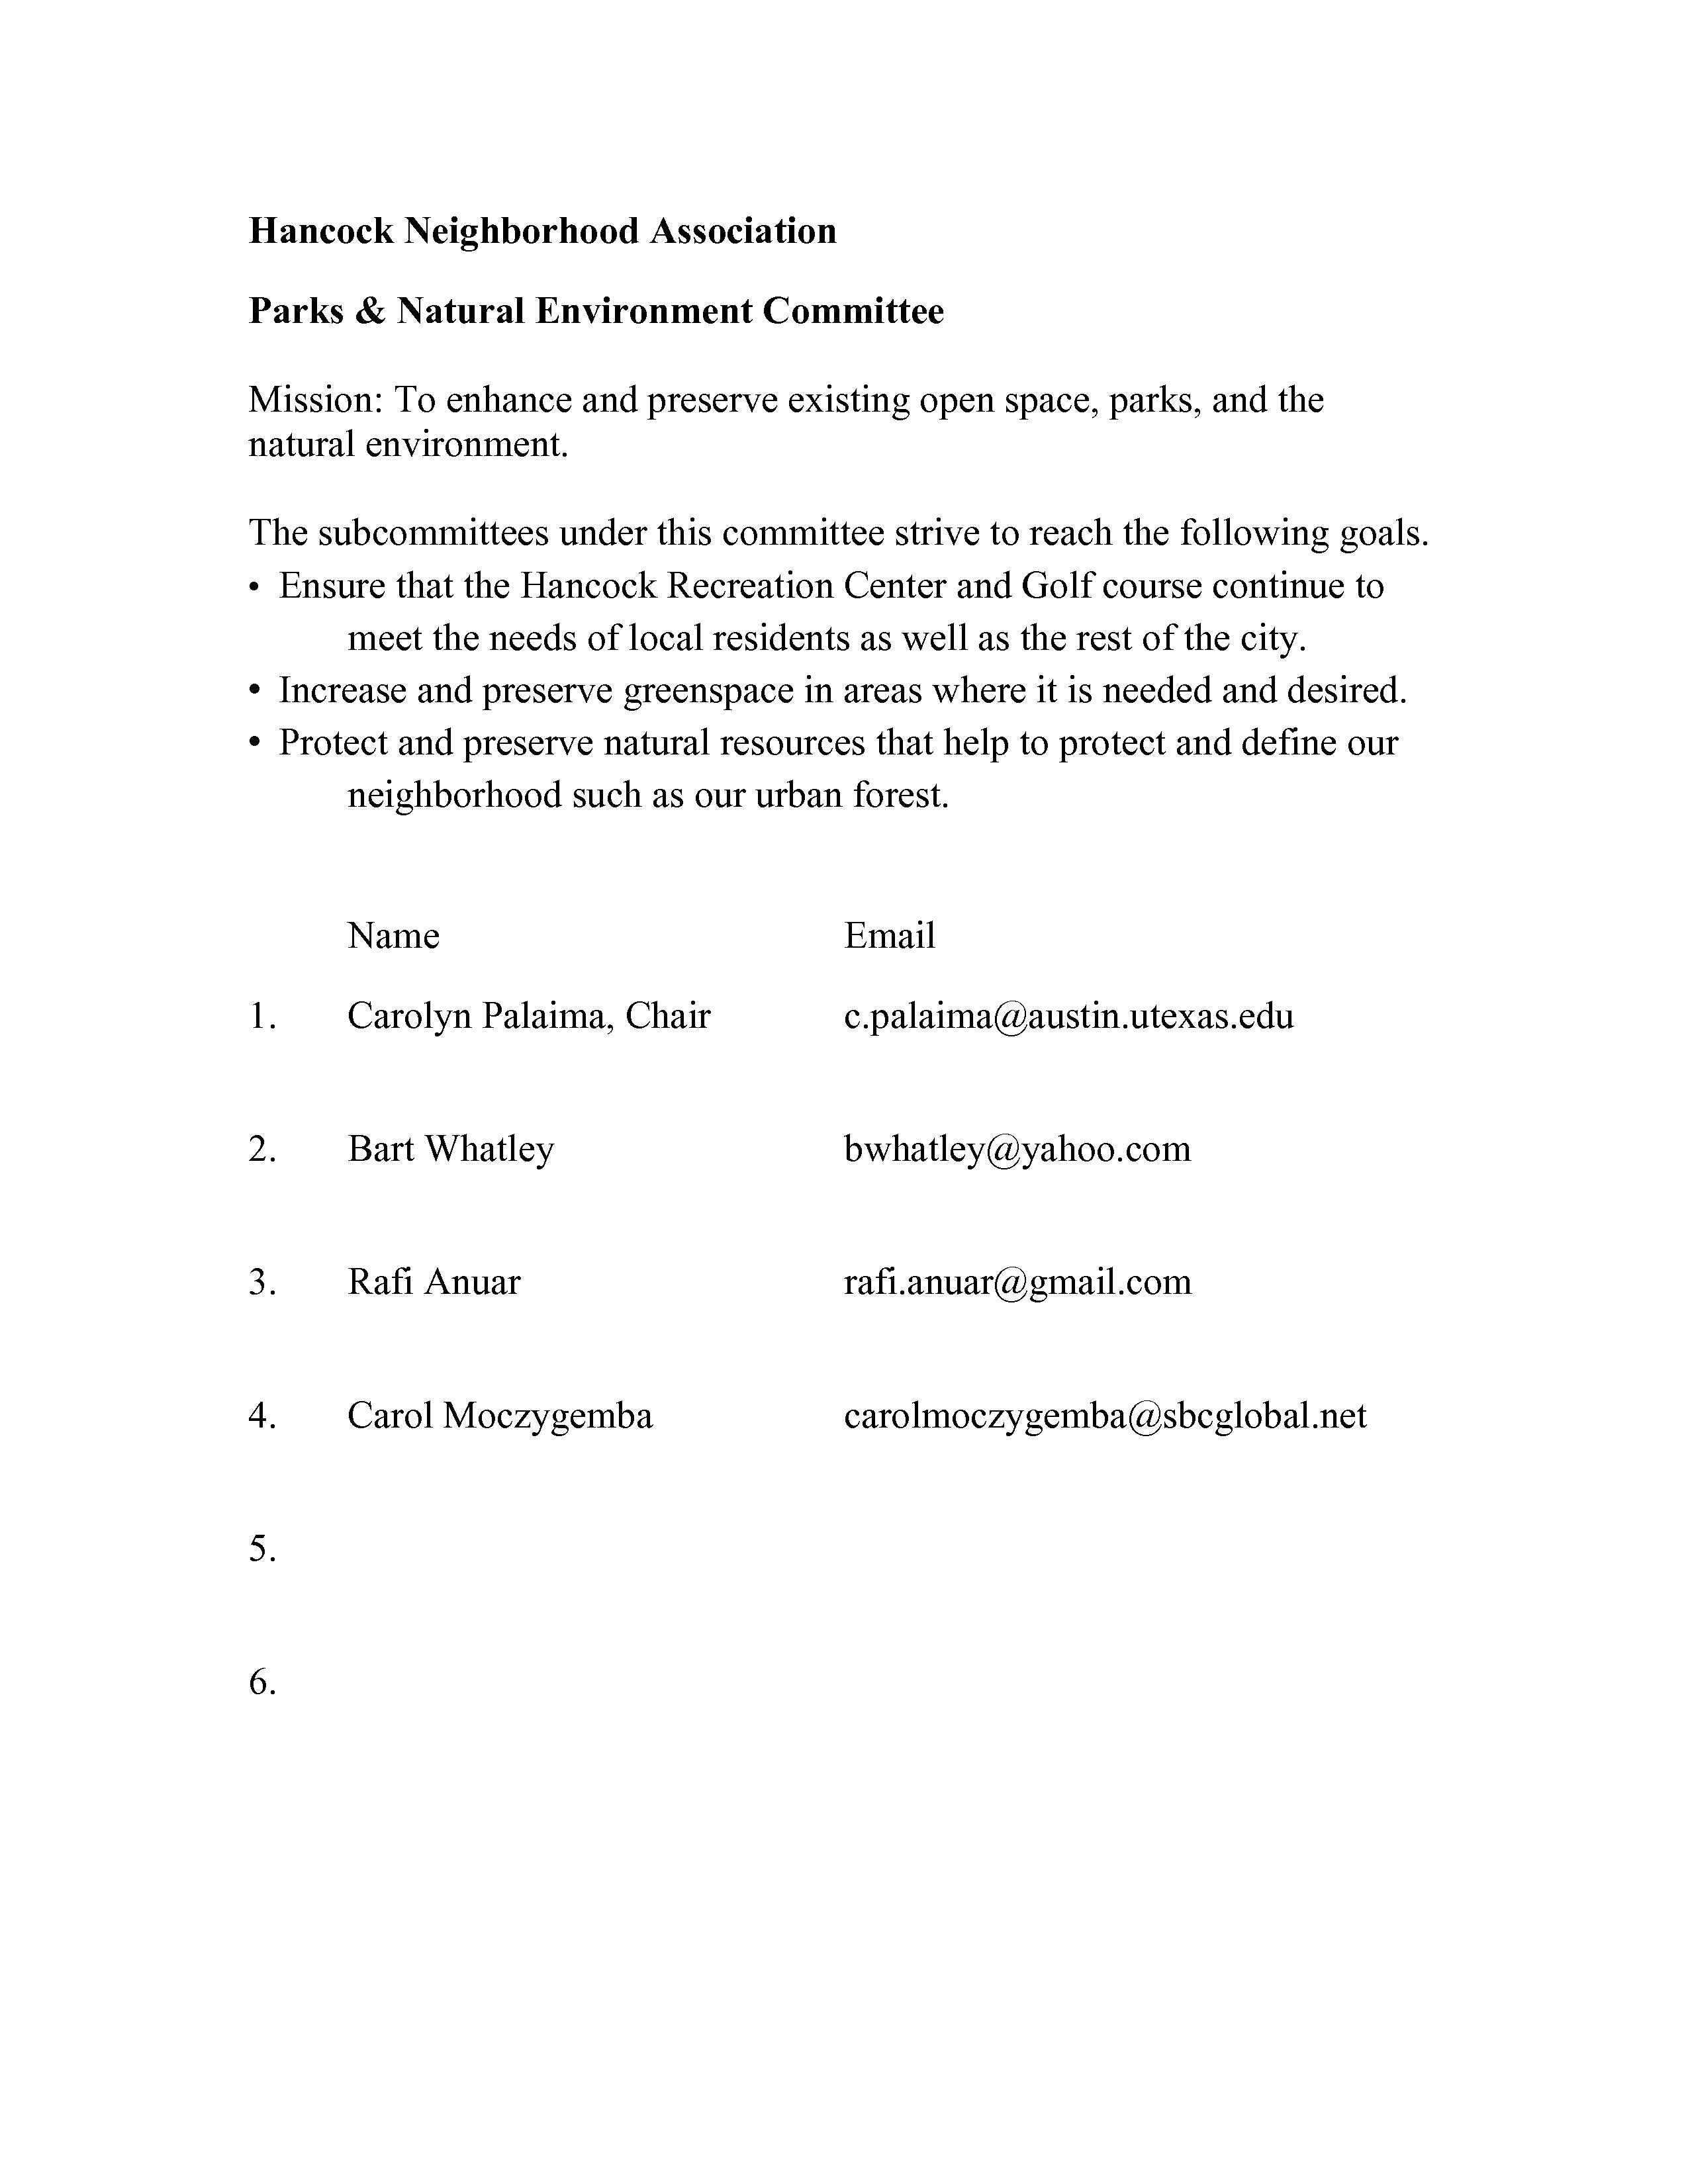 Parks & Natural Environment Committee